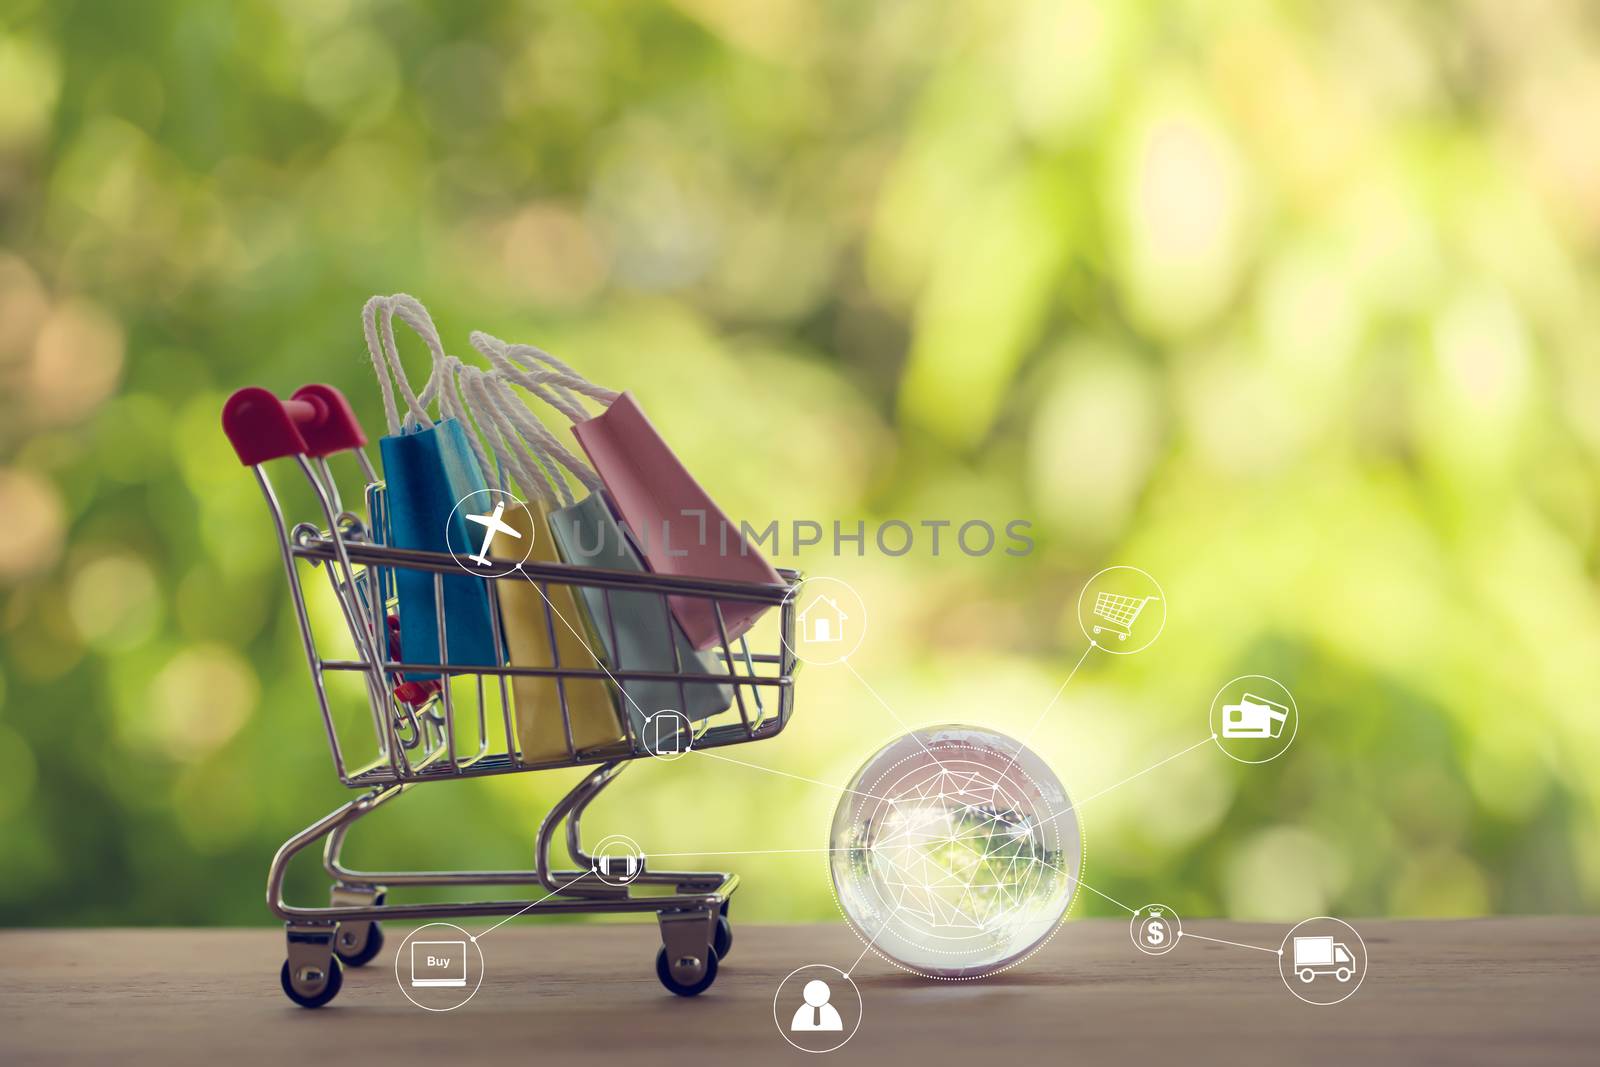 Online shopping, e-commerce concept: Paper shopping bags in a trolley or shopping cart with icon customer network connection. purchase of products on internet can purchase goods from foreign countries